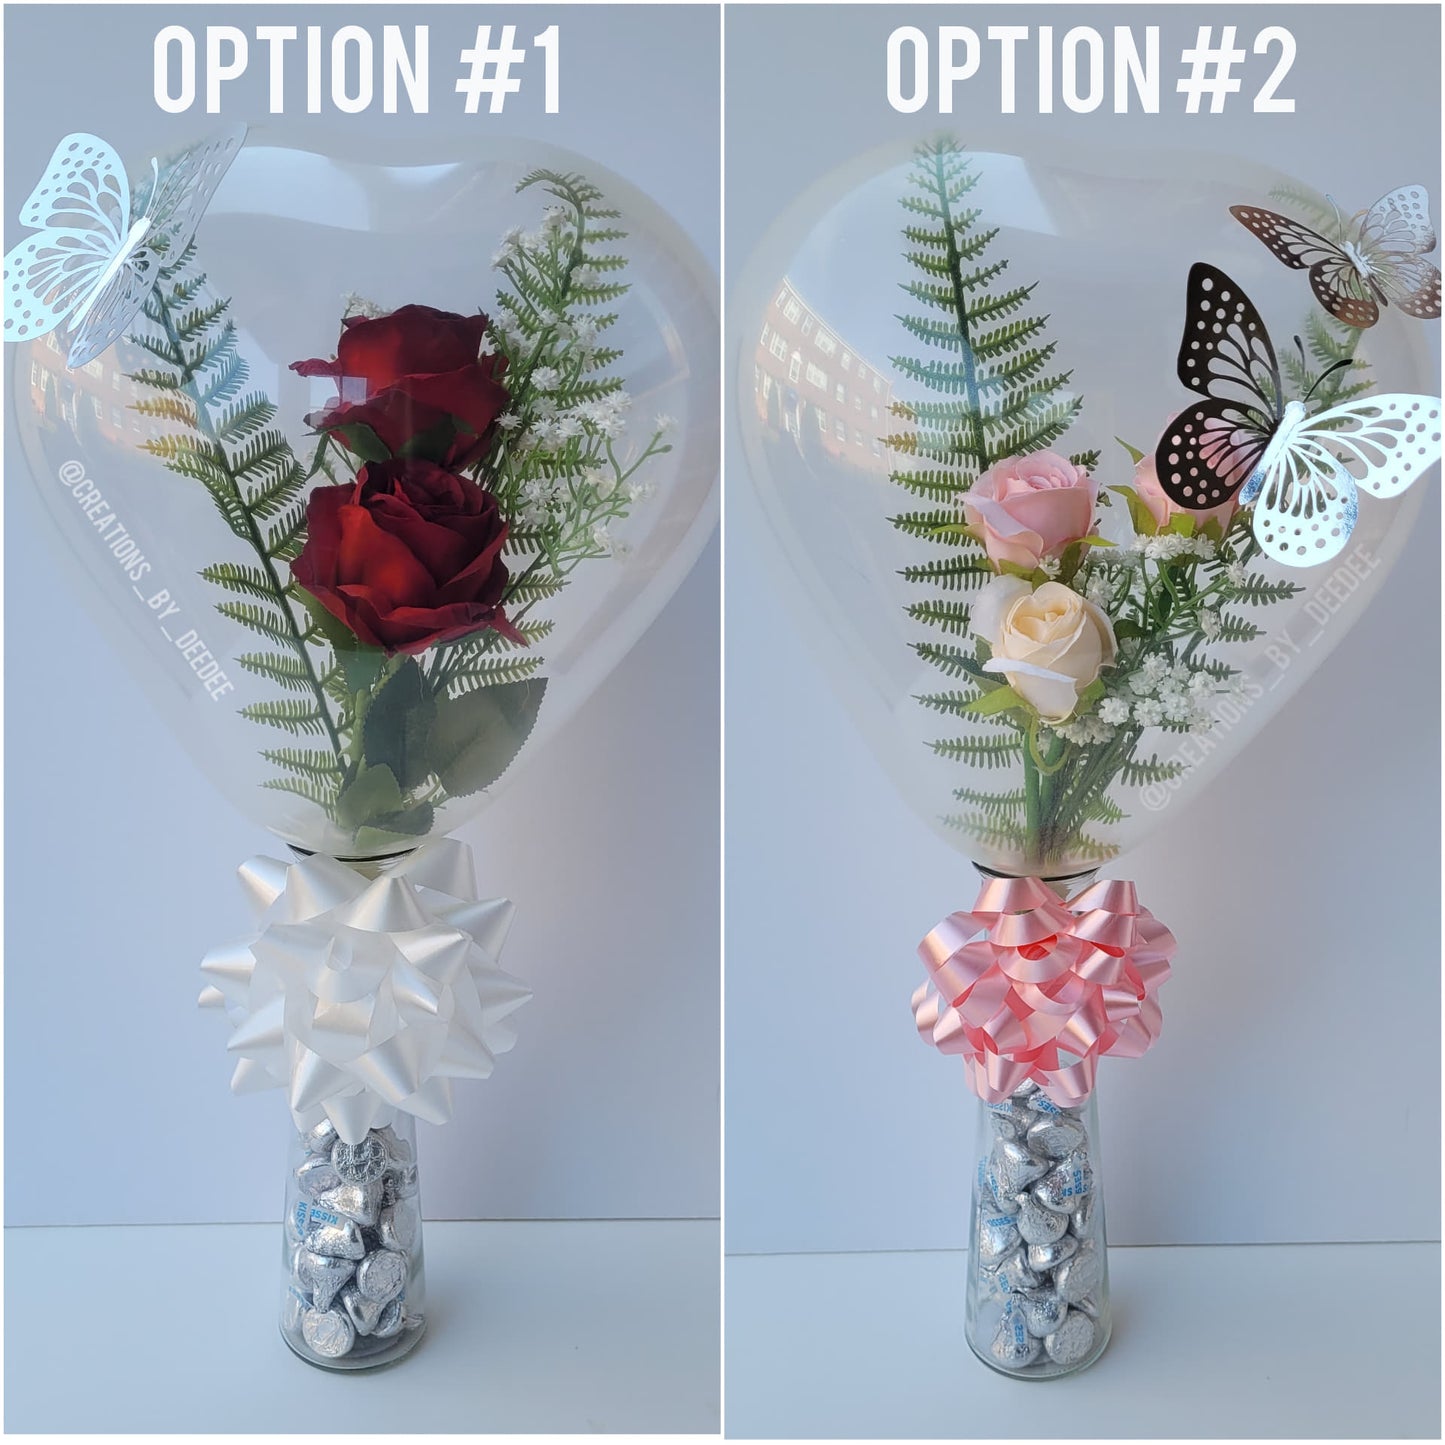 Heart Balloon Floral Arrangement w/ Hershey Kisses - PICK UP ONLY - NO DELIVERY/SHIPPING